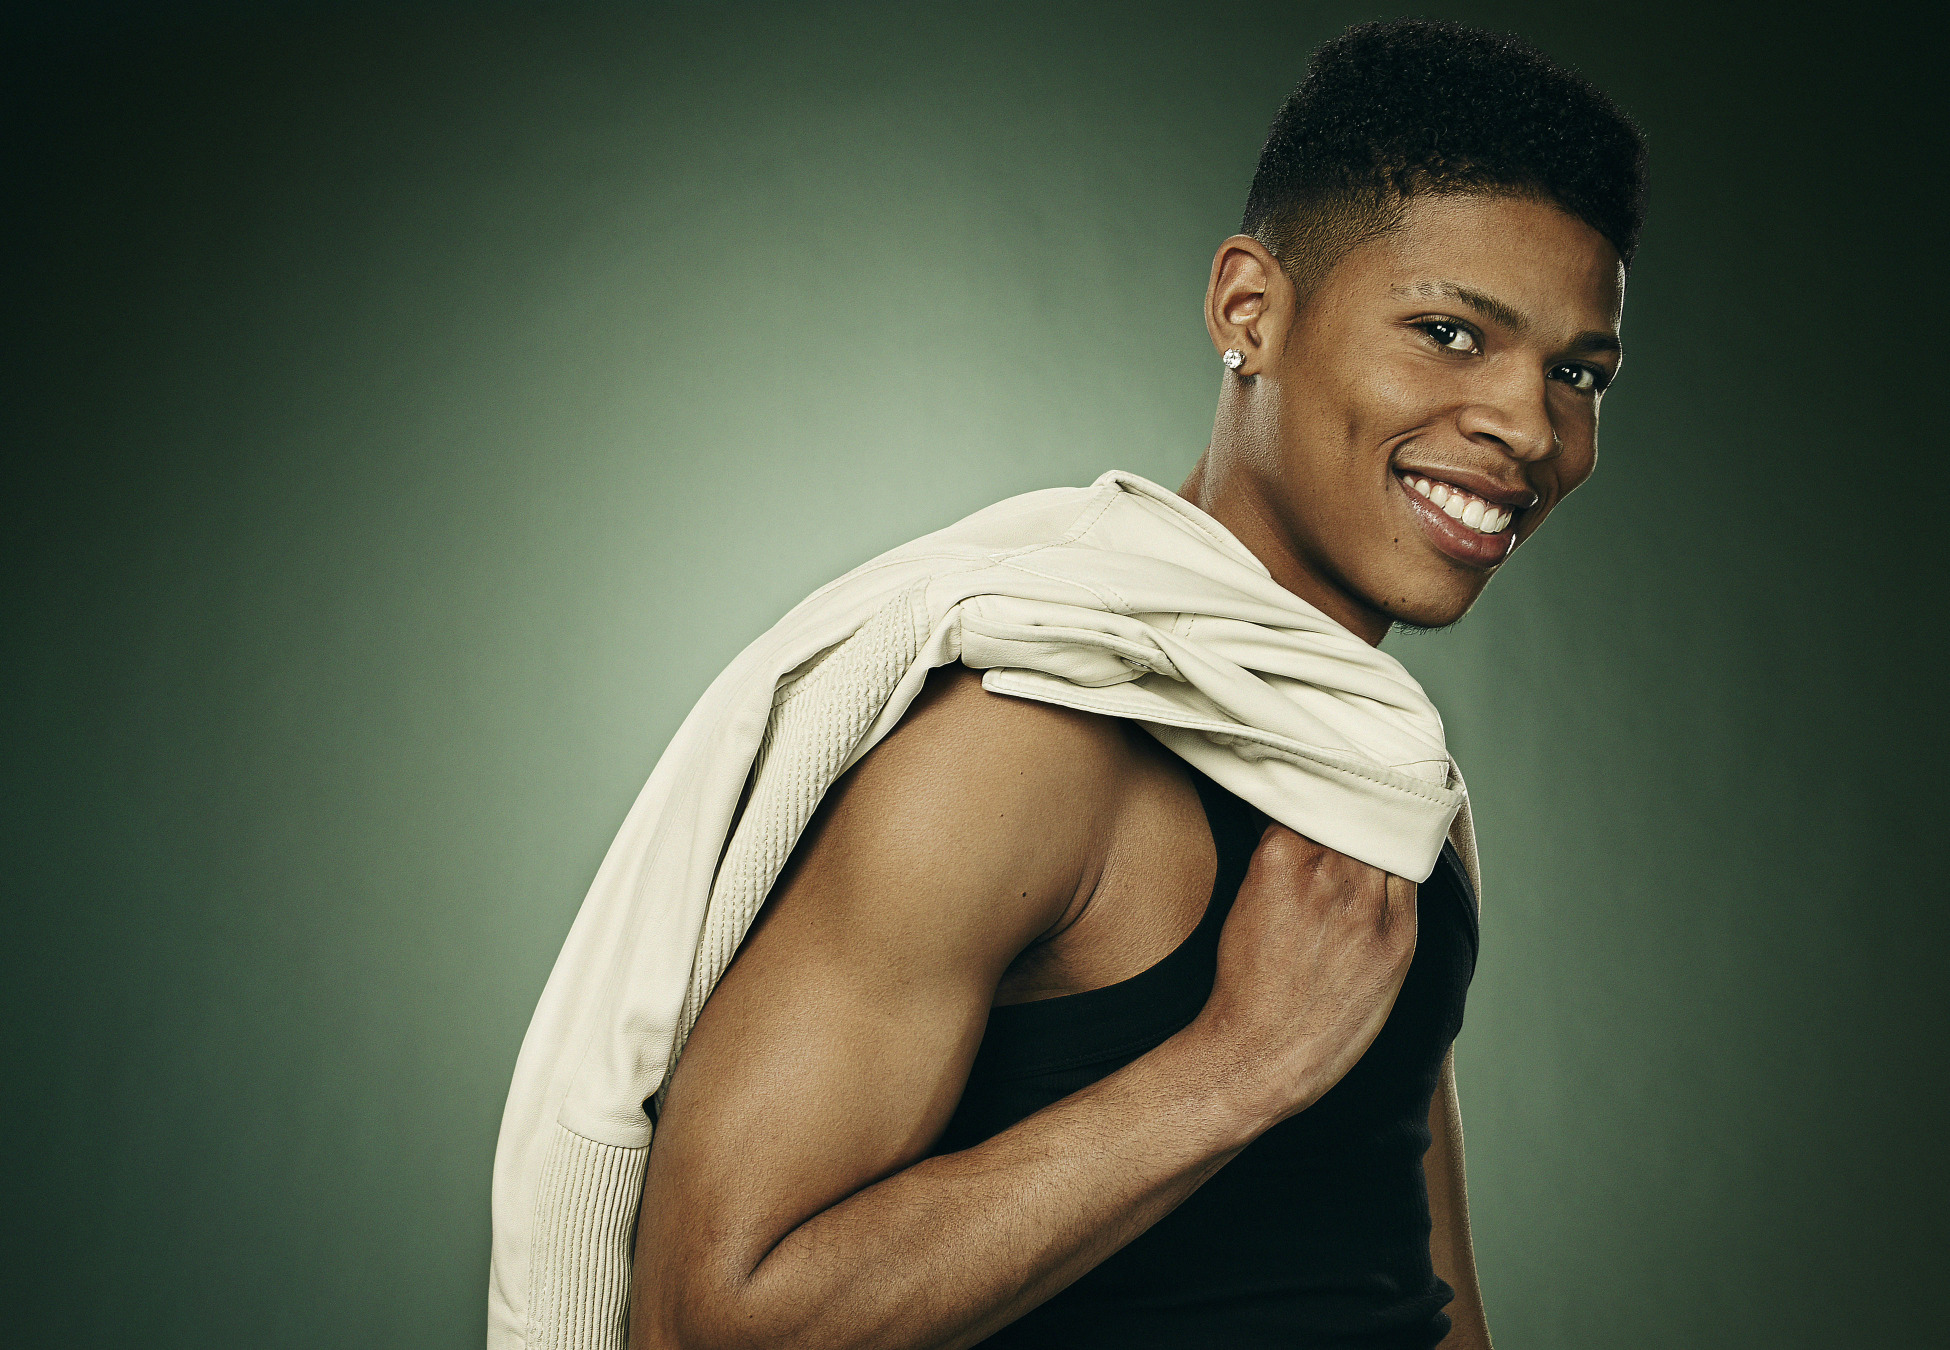 Empire Bryshere Gray As Hakeem Lyon Will Join The Schedule In